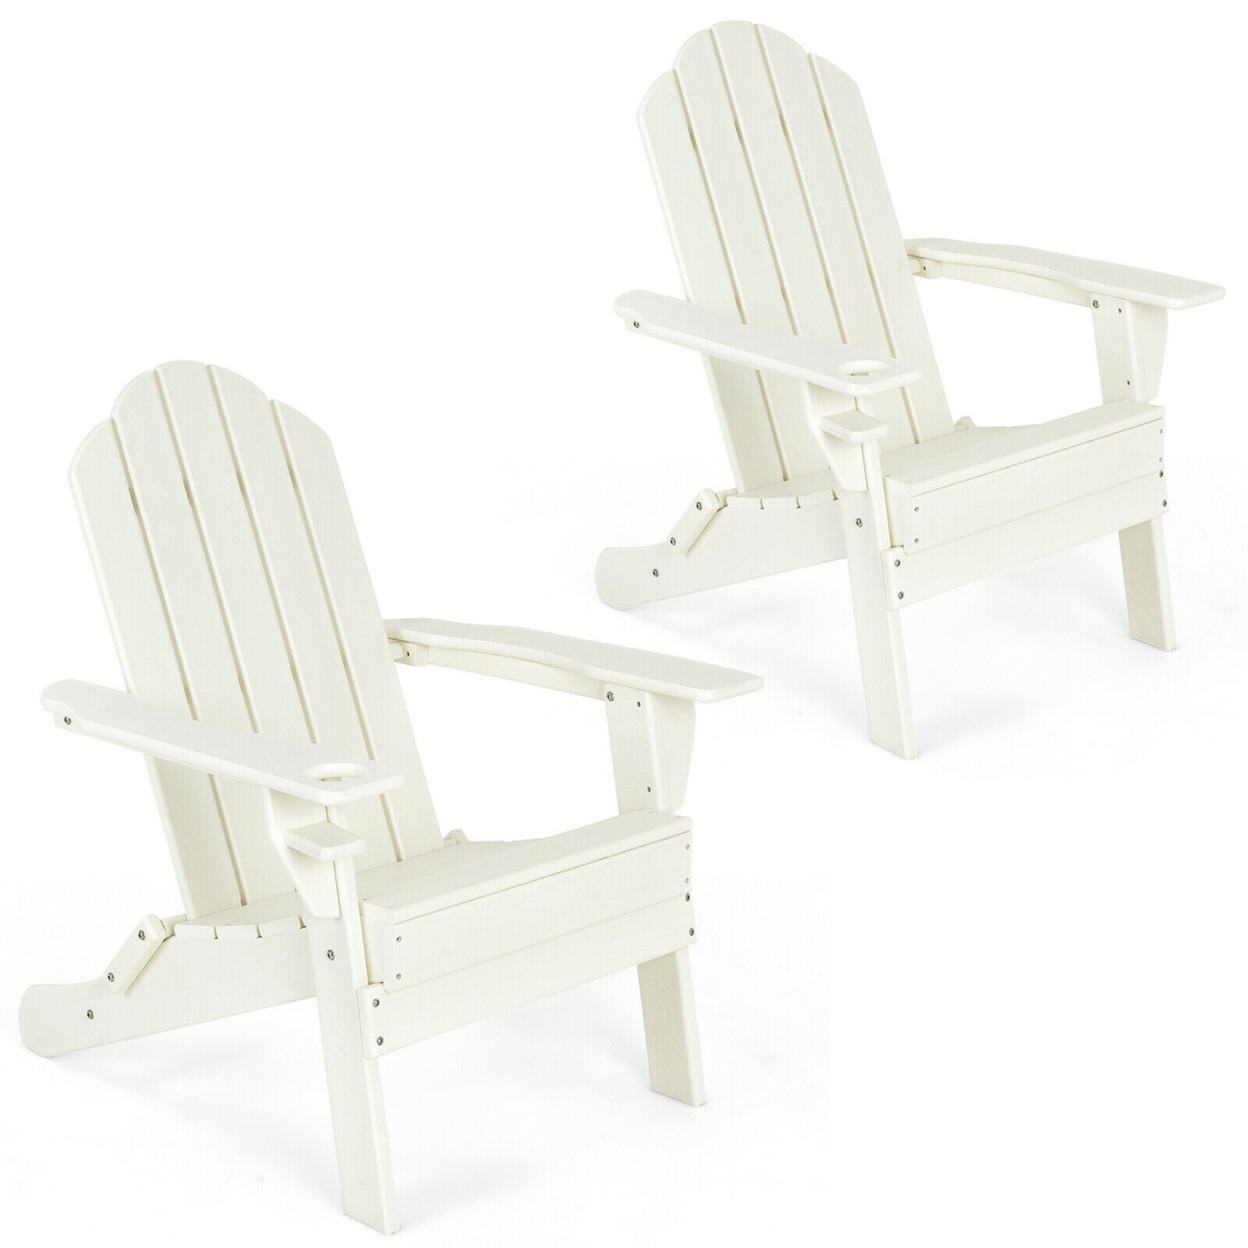 2PCS Patio Folding Adirondack Chair Weather Resistant Cup Holder Yard - White